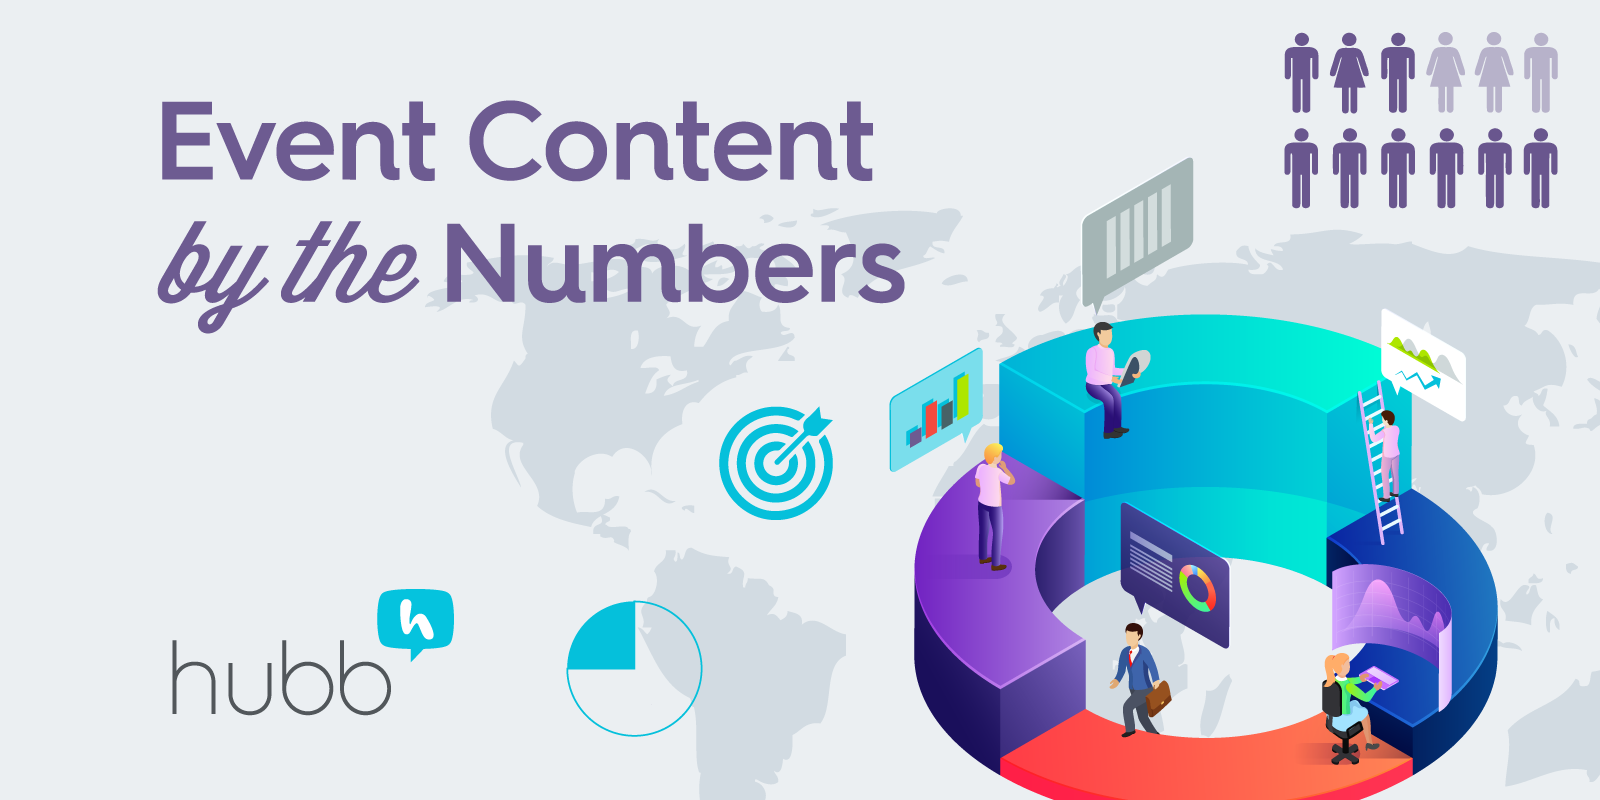 EventContent-by-the-Numbers-Social